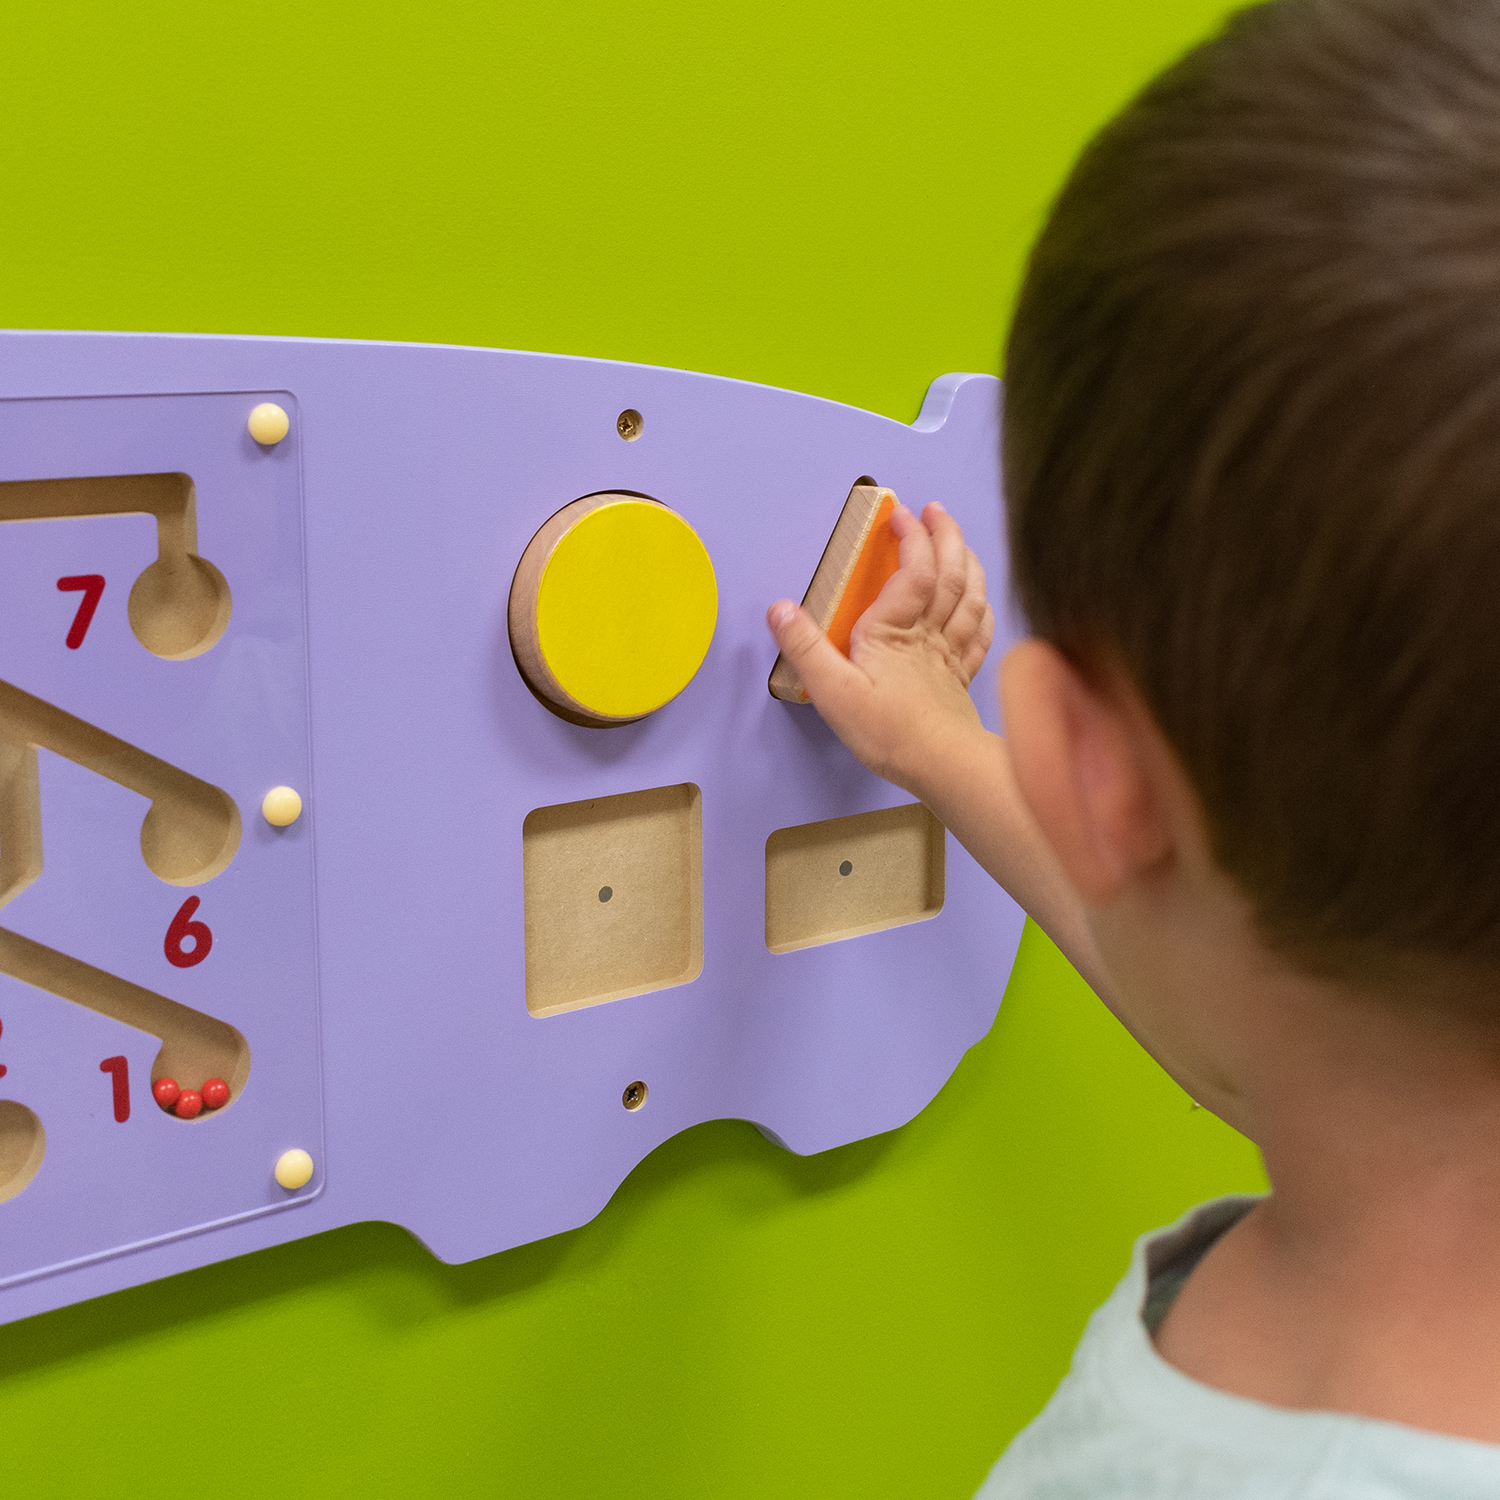 Learning Advantage Hippo Activity Wall Panel - 18m+ - Toddler Activity Center image number null